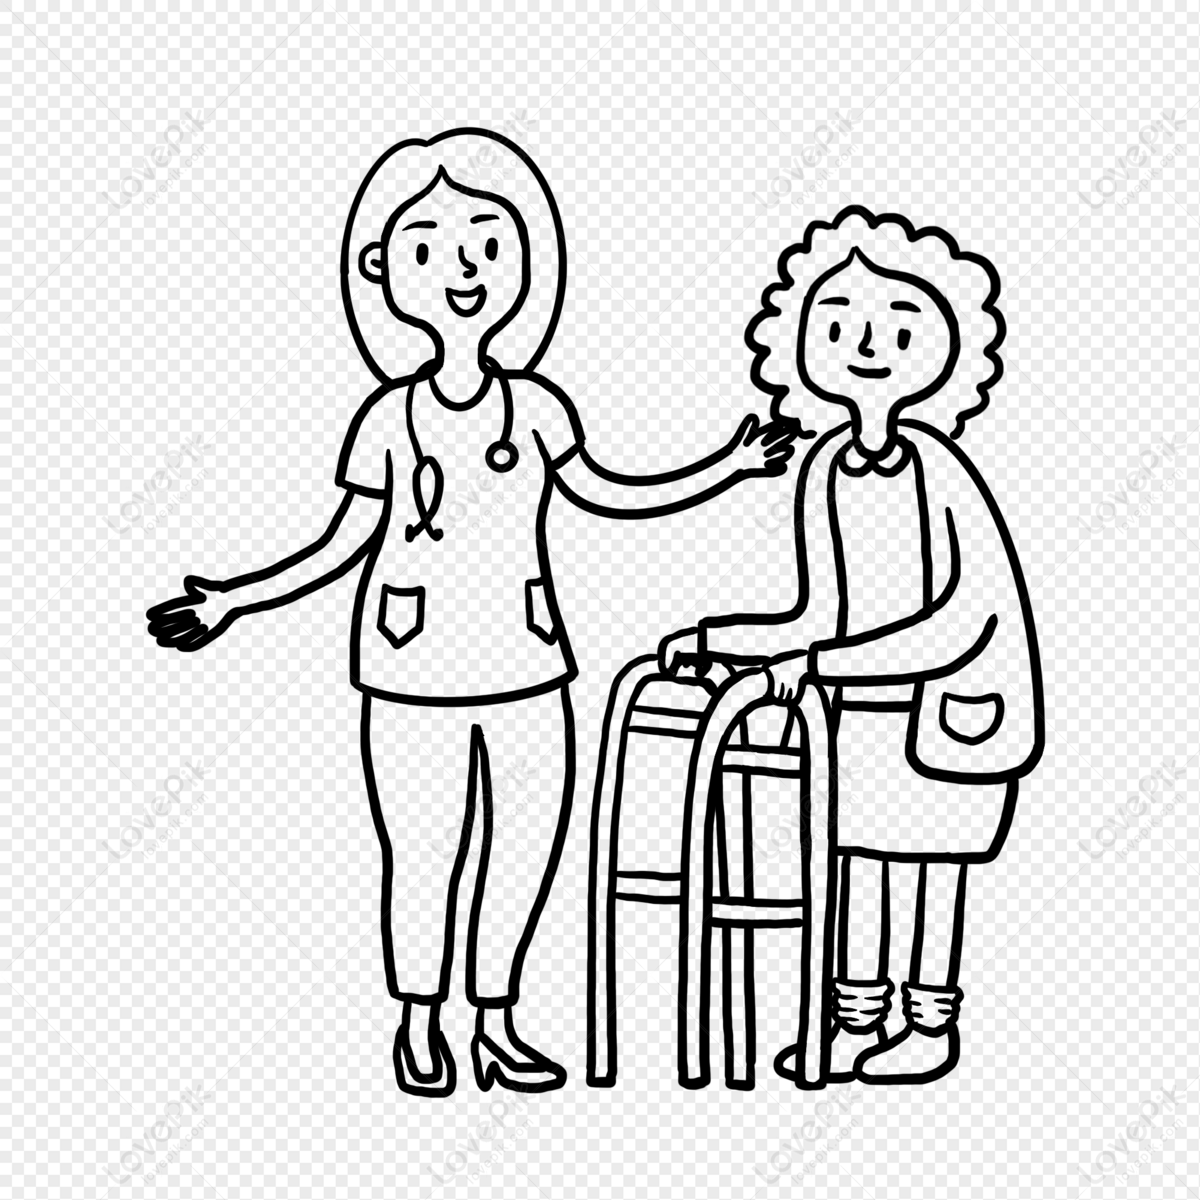 File:A line drawing of a doctor asking a patient to wait a moment by  holding up a finger.jpg - Wikimedia Commons